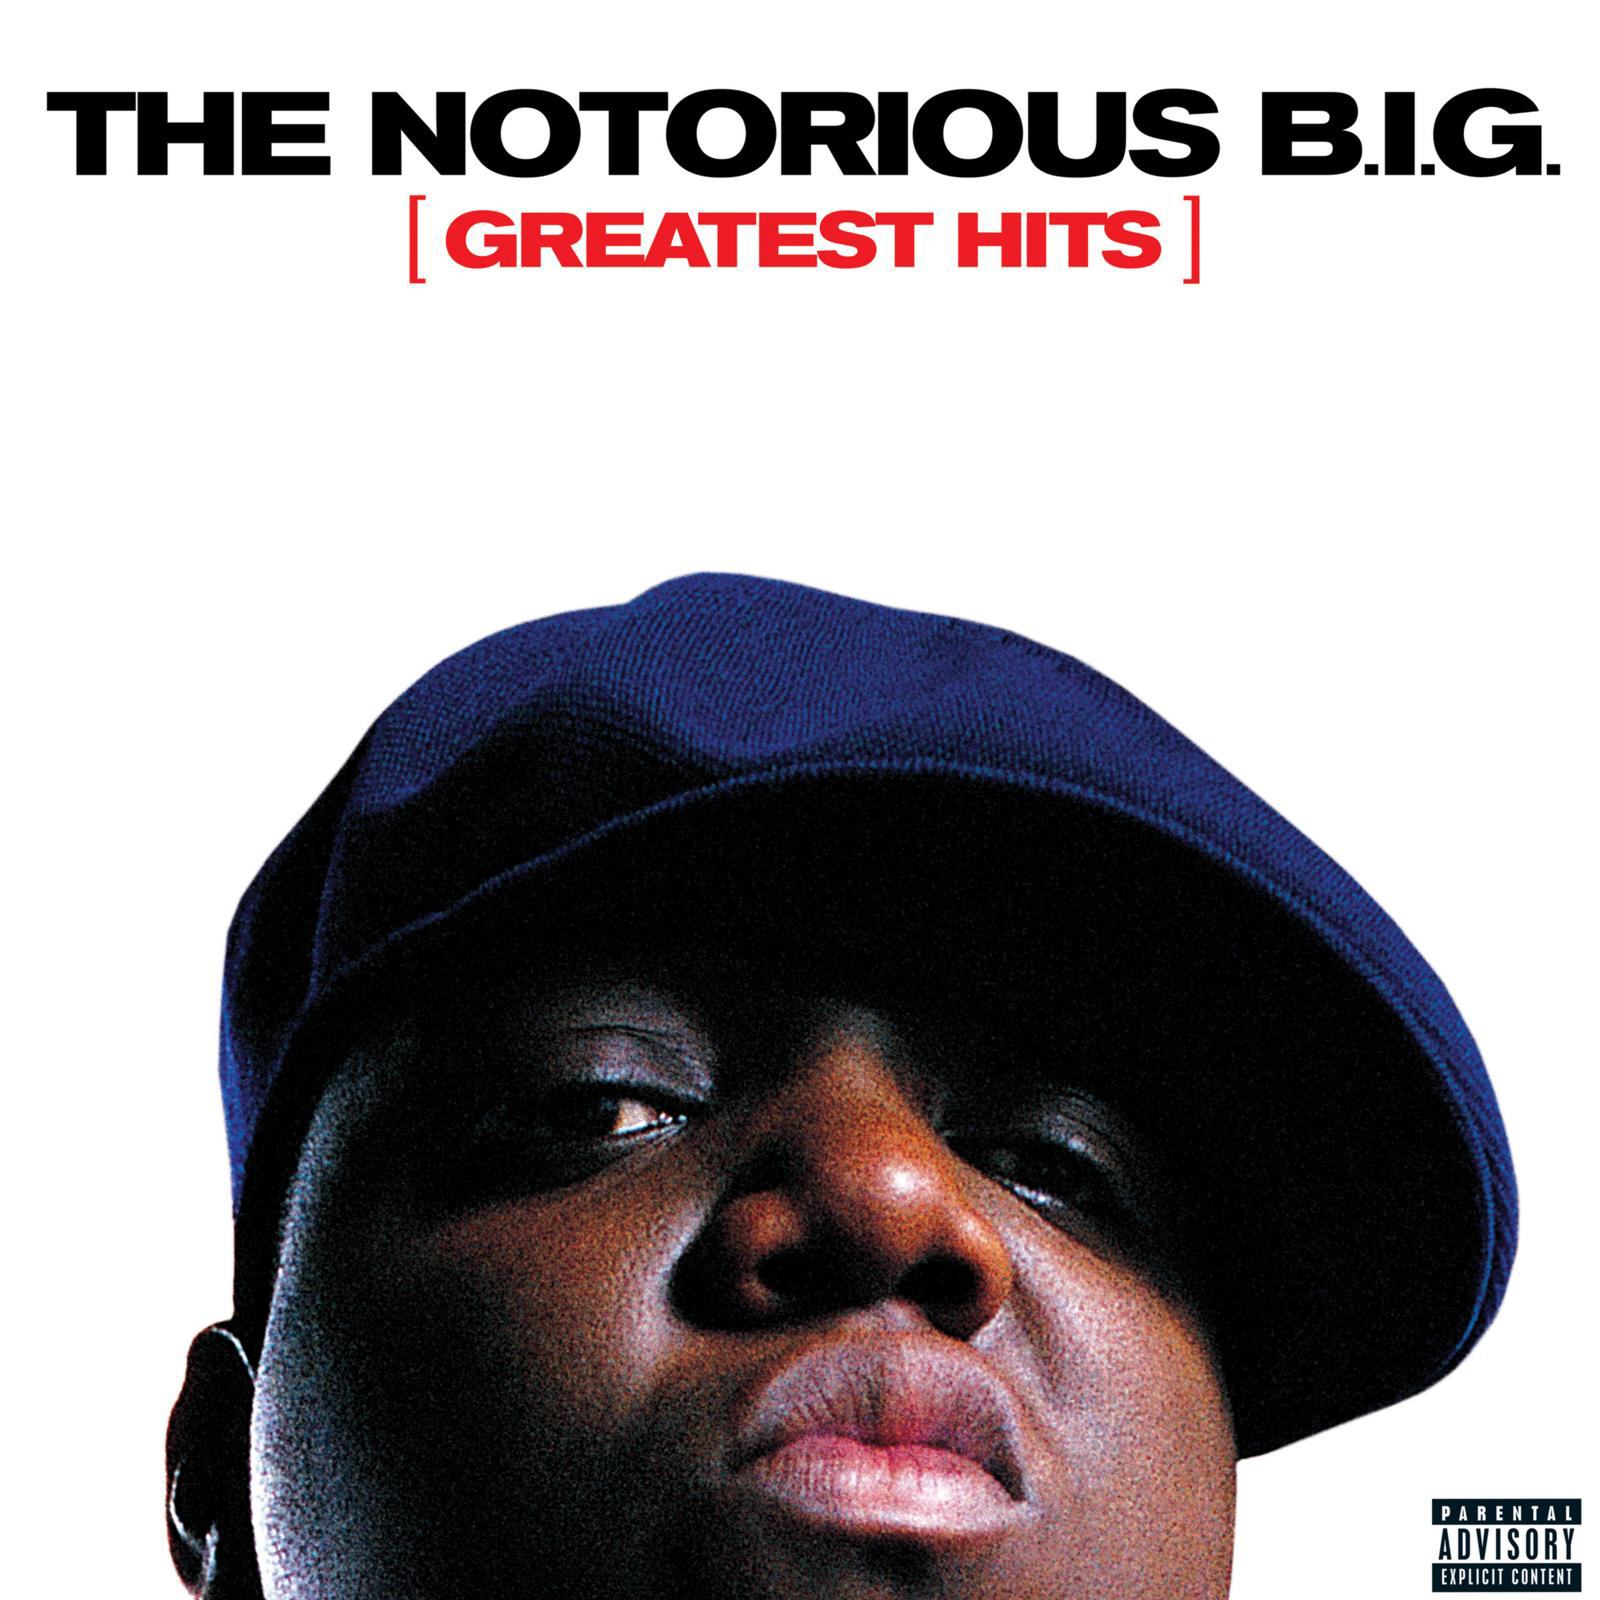 The Notorious B.I.G. Greatest Hits (Vinyl) 12" Album - Picture 1 of 1